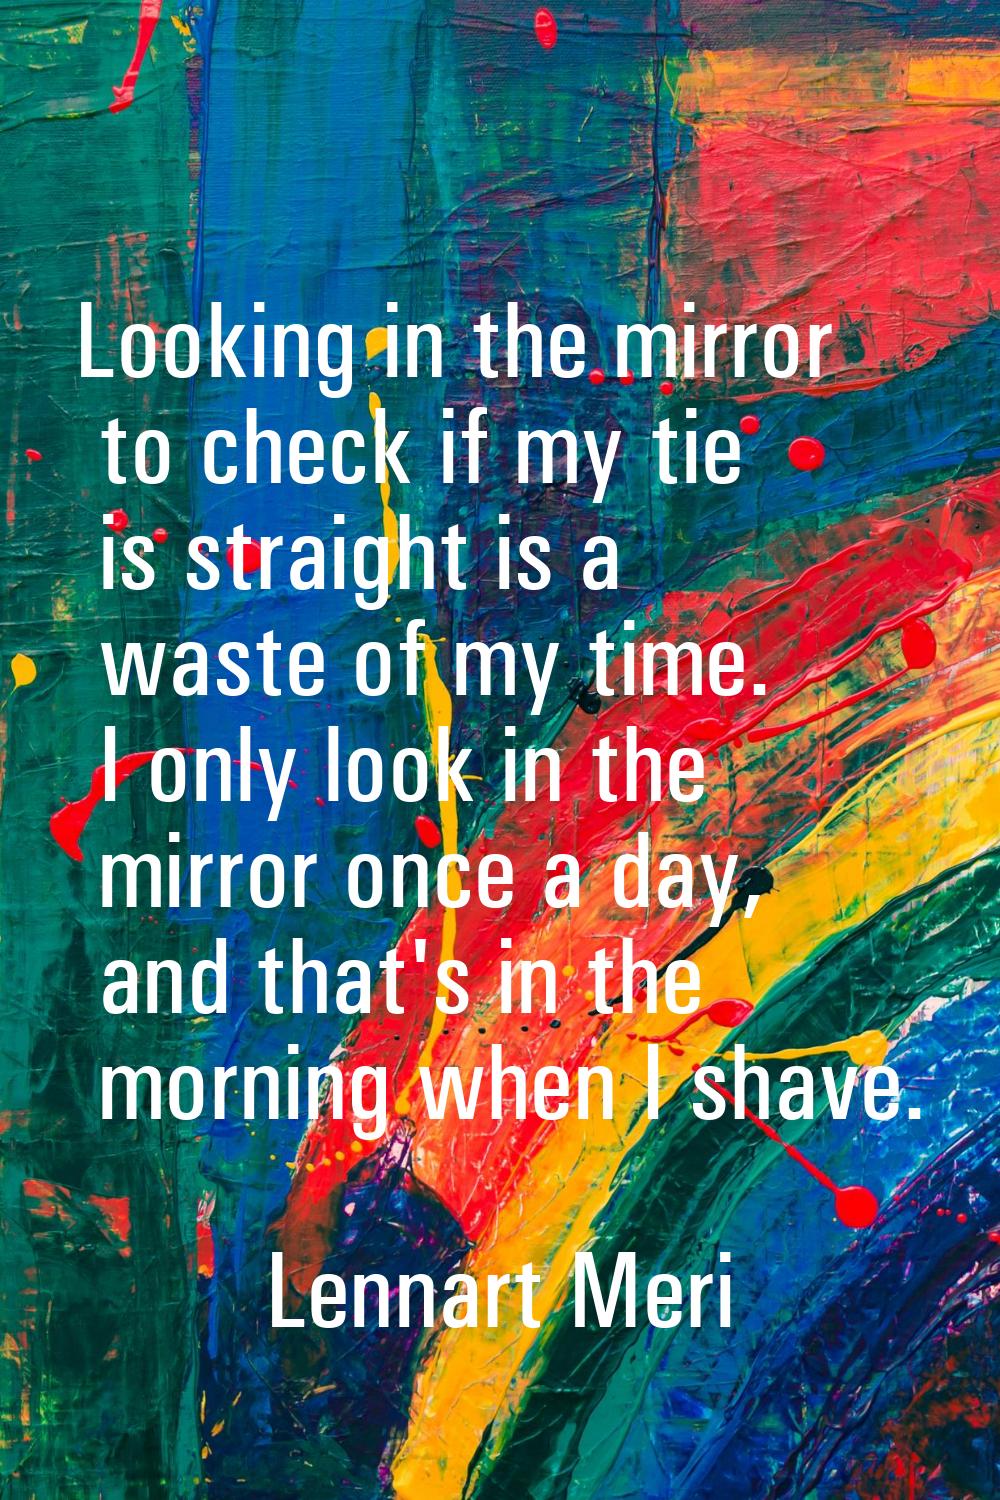 Looking in the mirror to check if my tie is straight is a waste of my time. I only look in the mirr